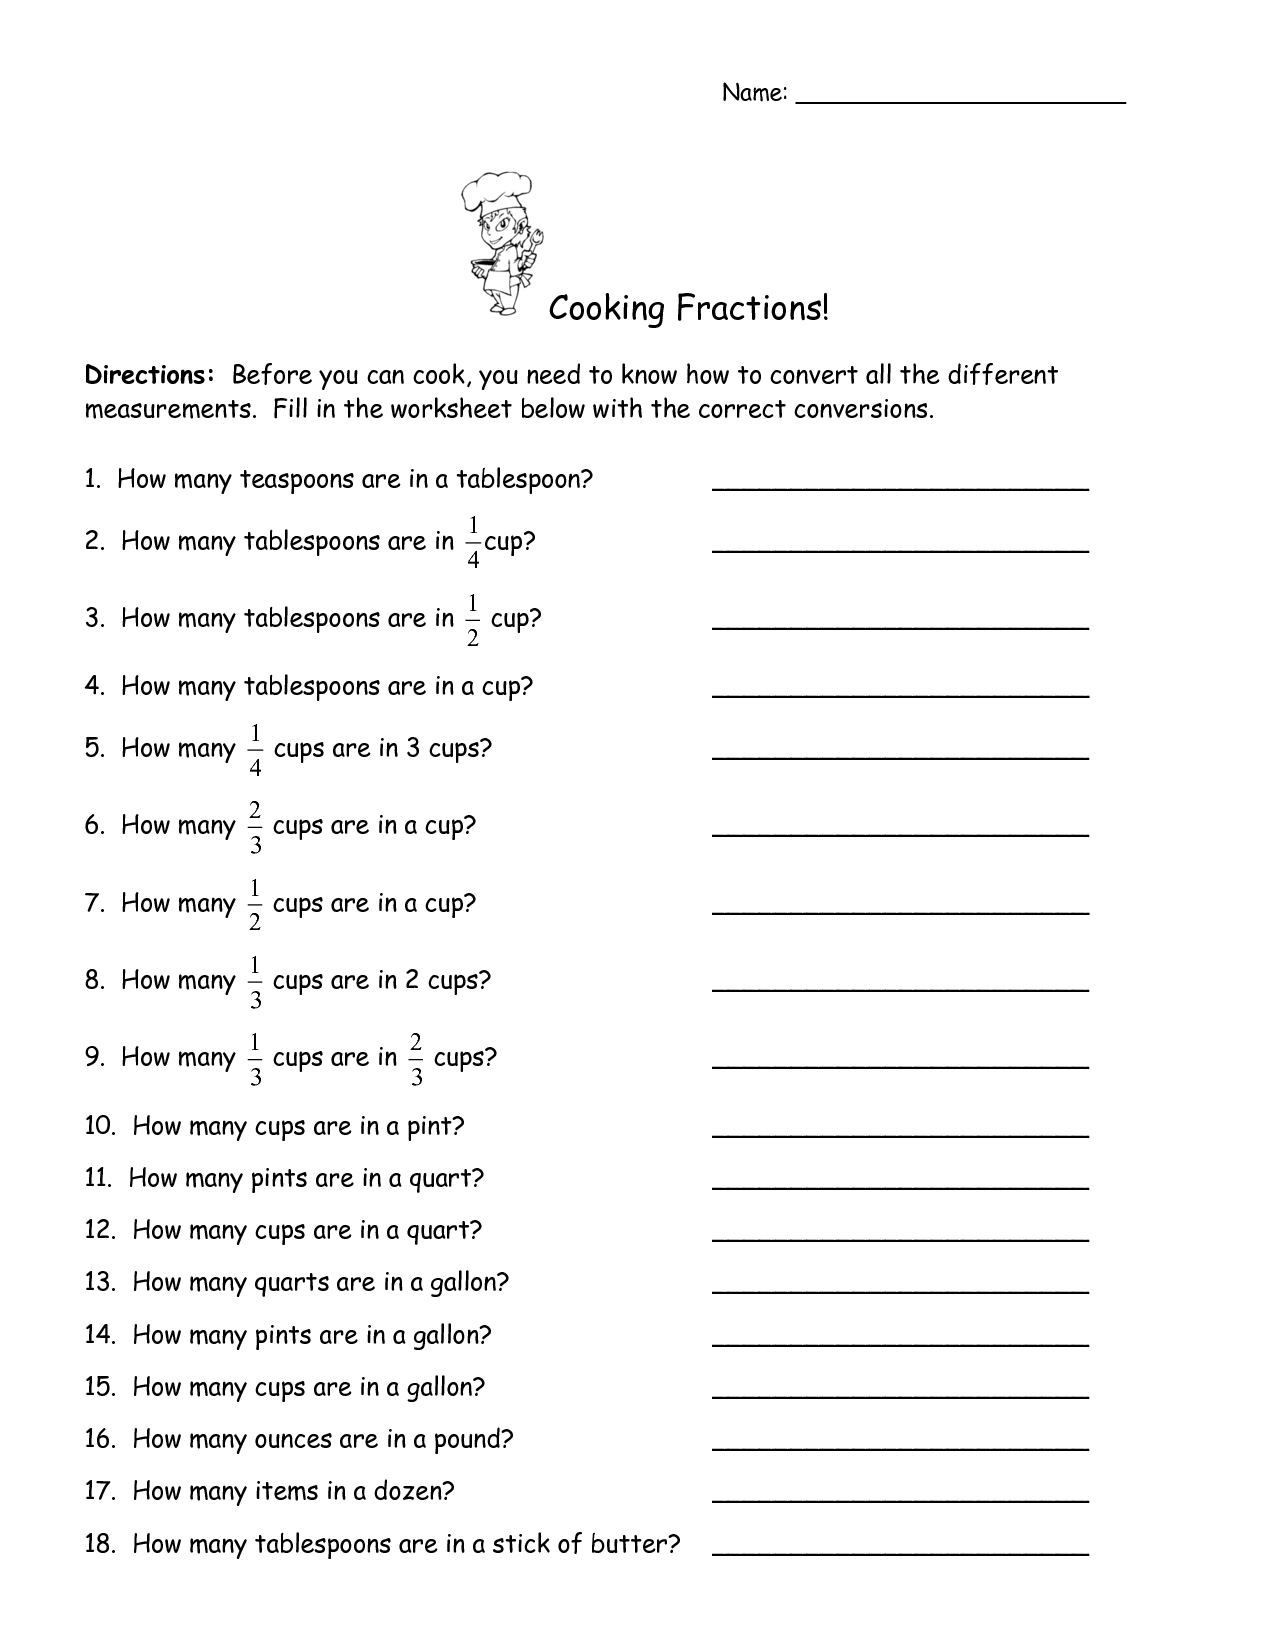 12 Best Images Of Fraction Worksheets Measuring Cup Cooking With Fractions Measuring Cups